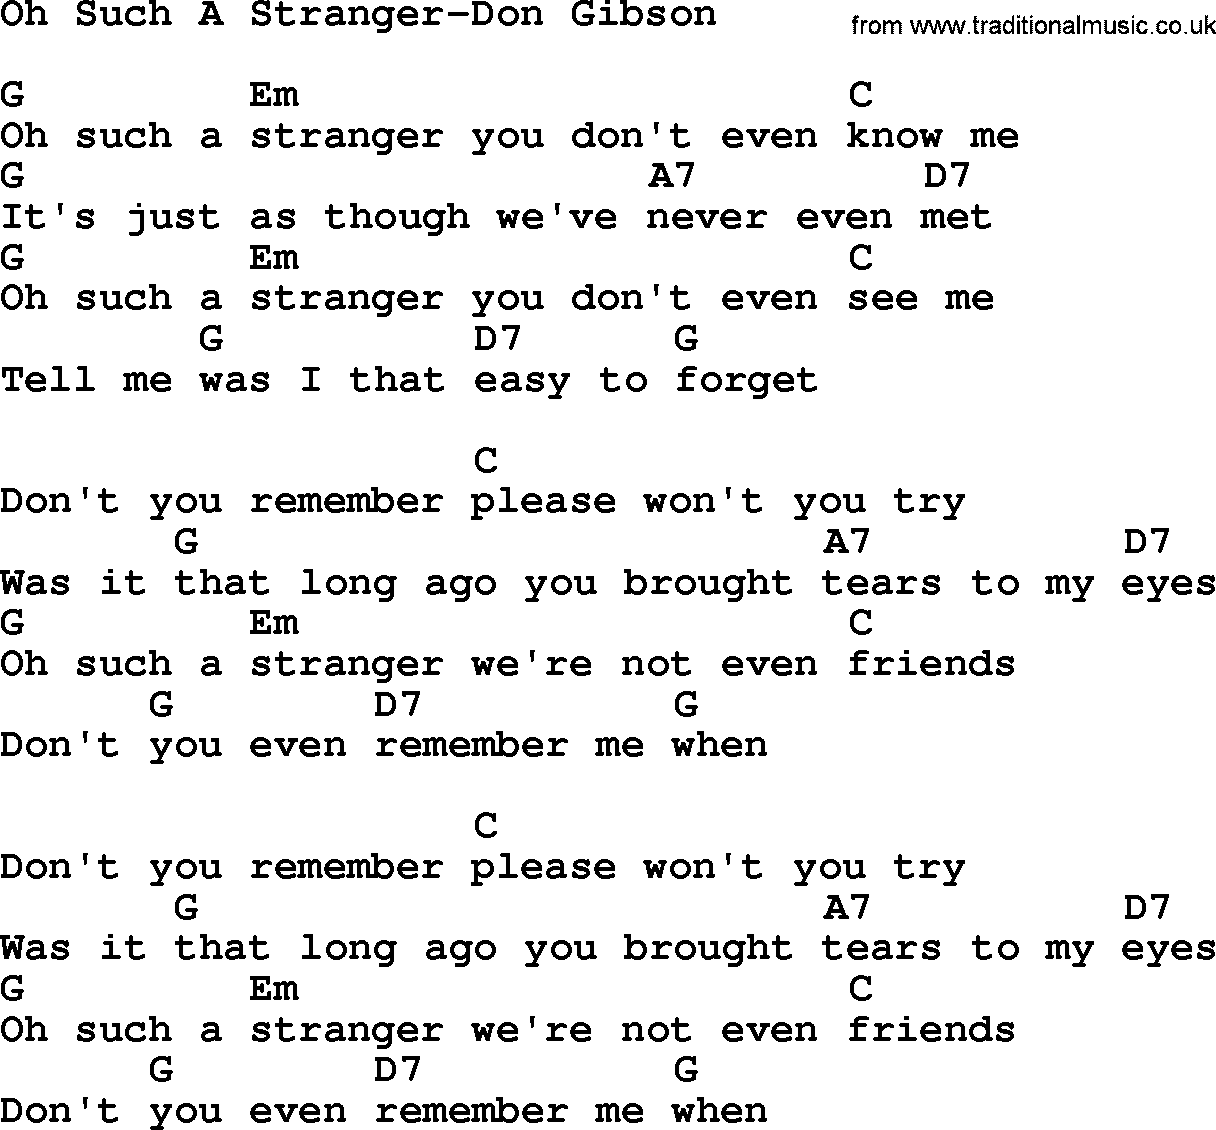 Country music song: Oh Such A Stranger-Don Gibson lyrics and chords